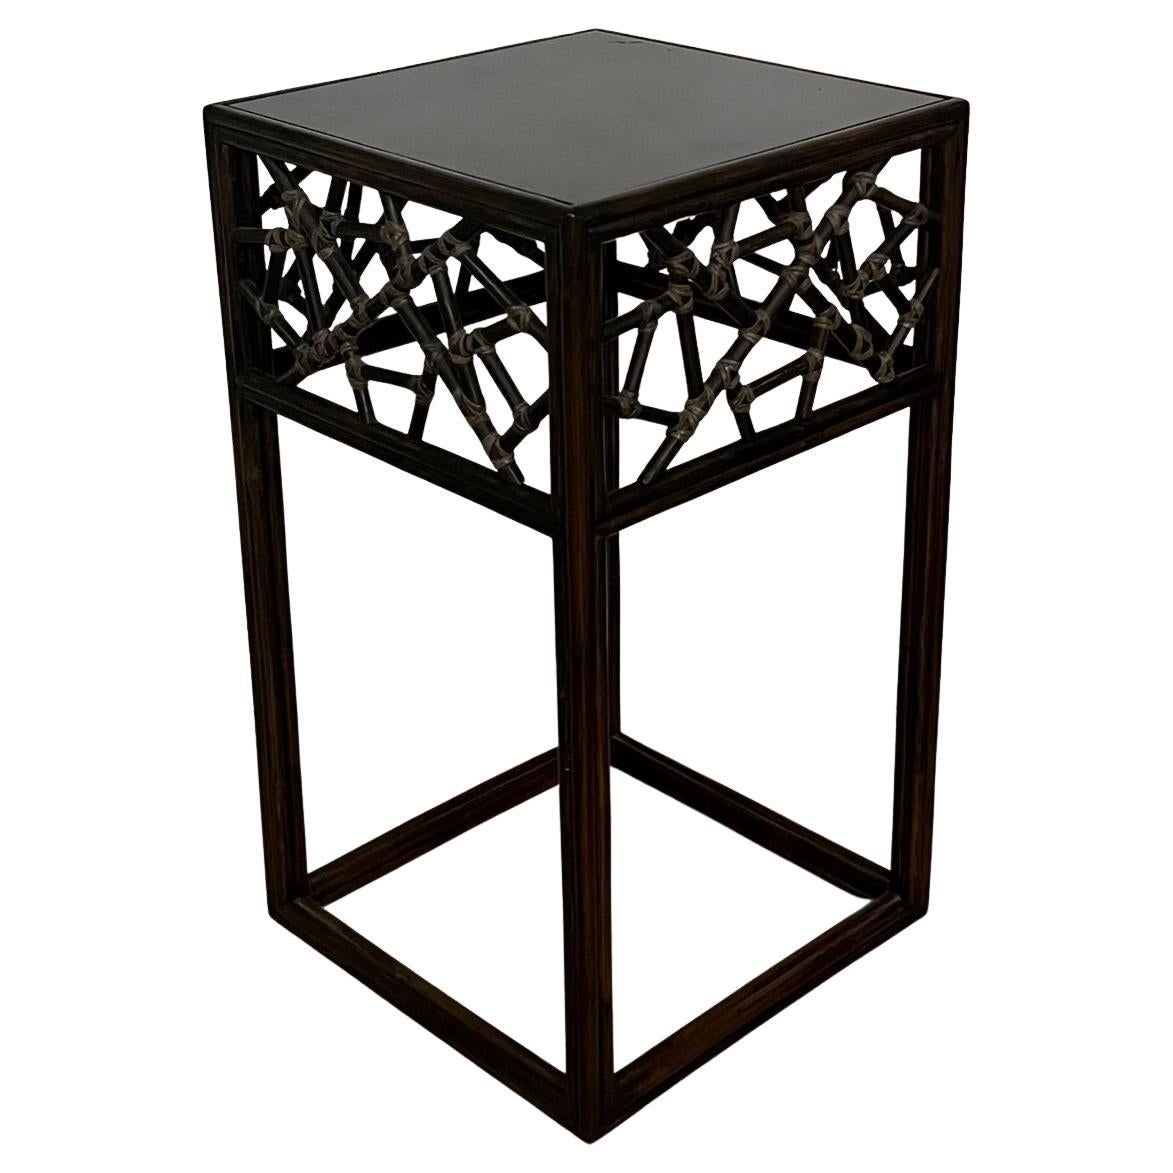 McGuire Bamboo Rattan Square Side Table with Glass Top